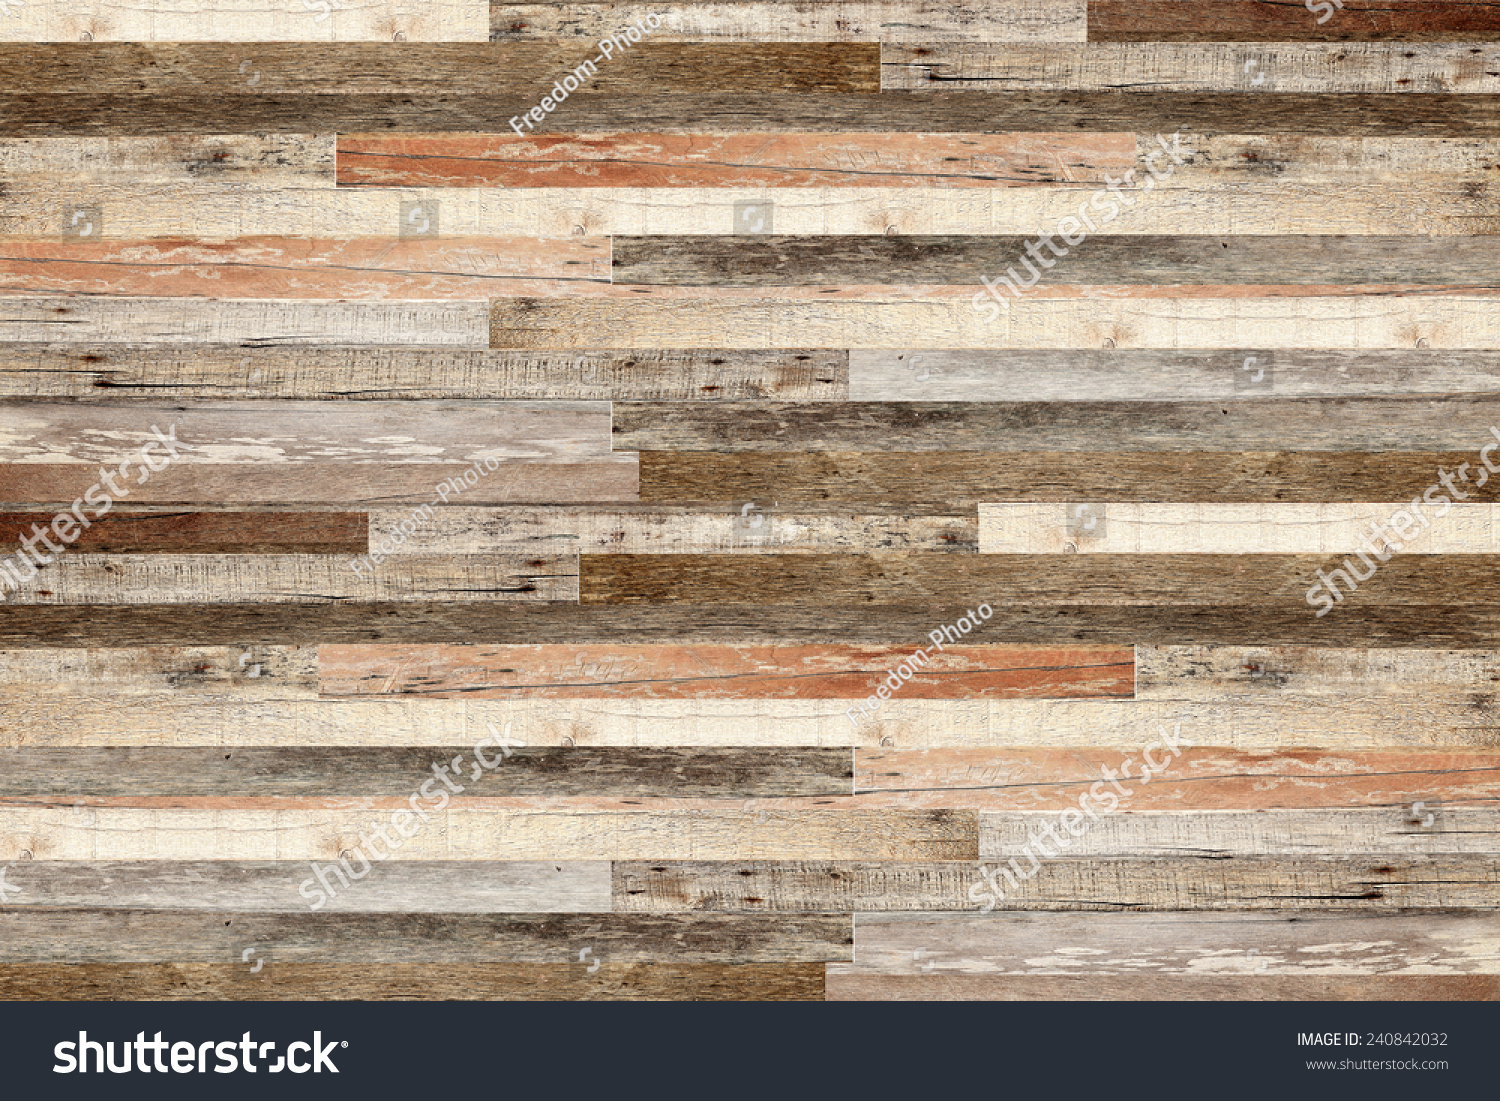 Wooden Wall Background. Stock Photo 240842032 : Shutterstock